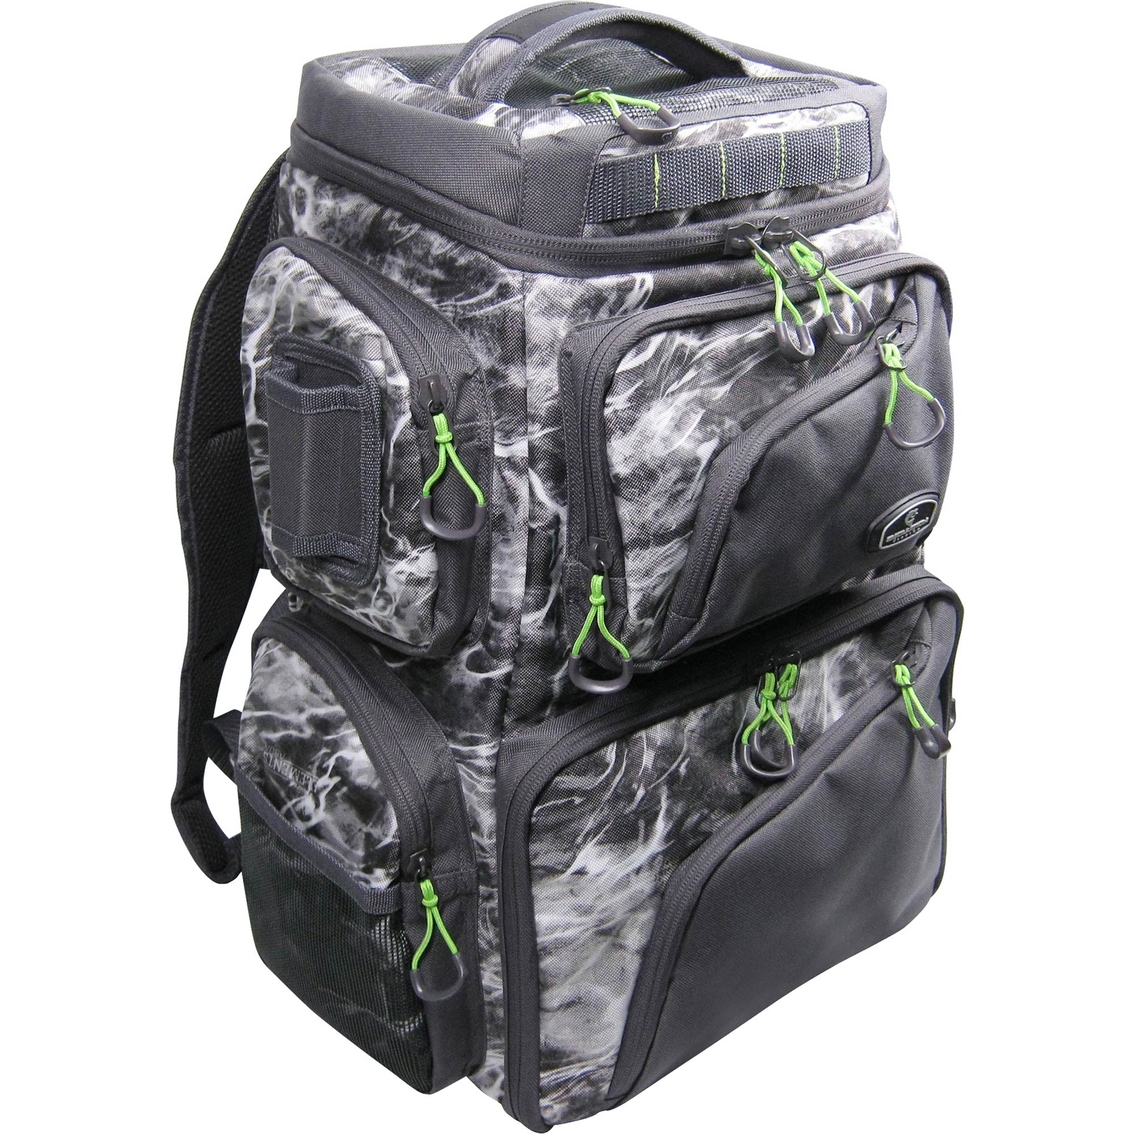 Evolution Outdoors Largemouth 3600 Backpack - Image 4 of 6